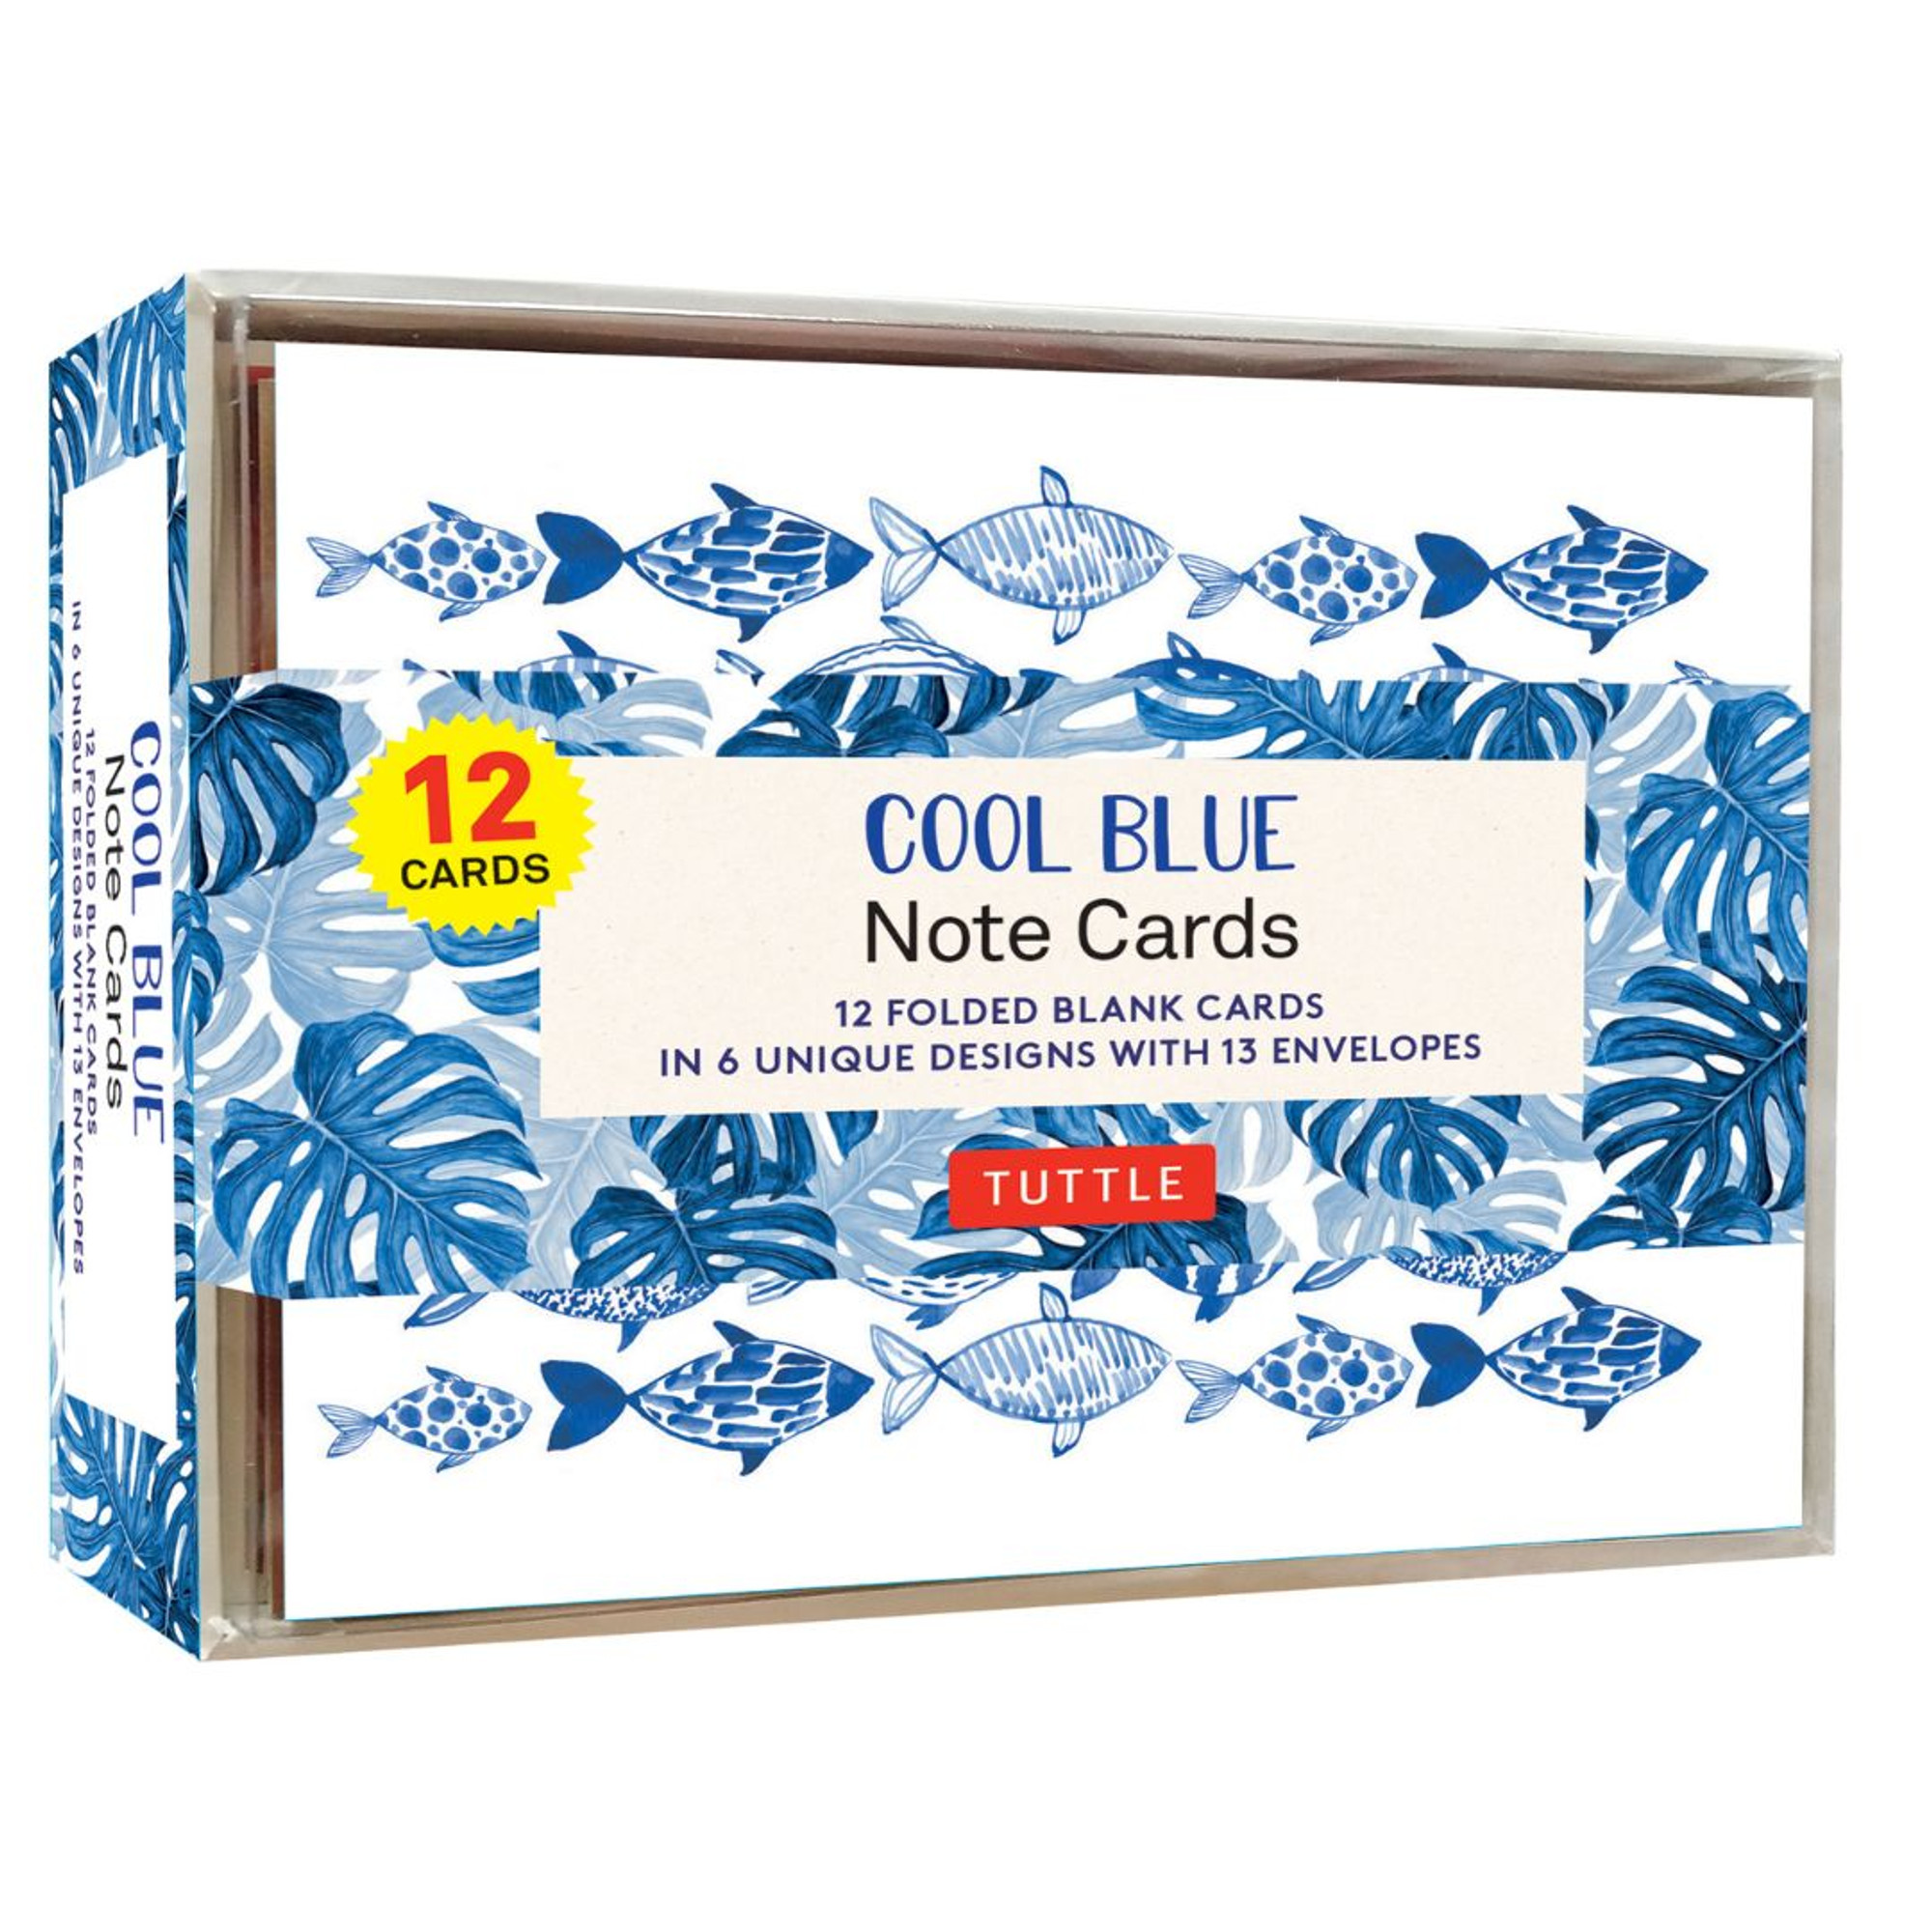 Cool Blue Note Cards - 12 Cards (9780804854832)